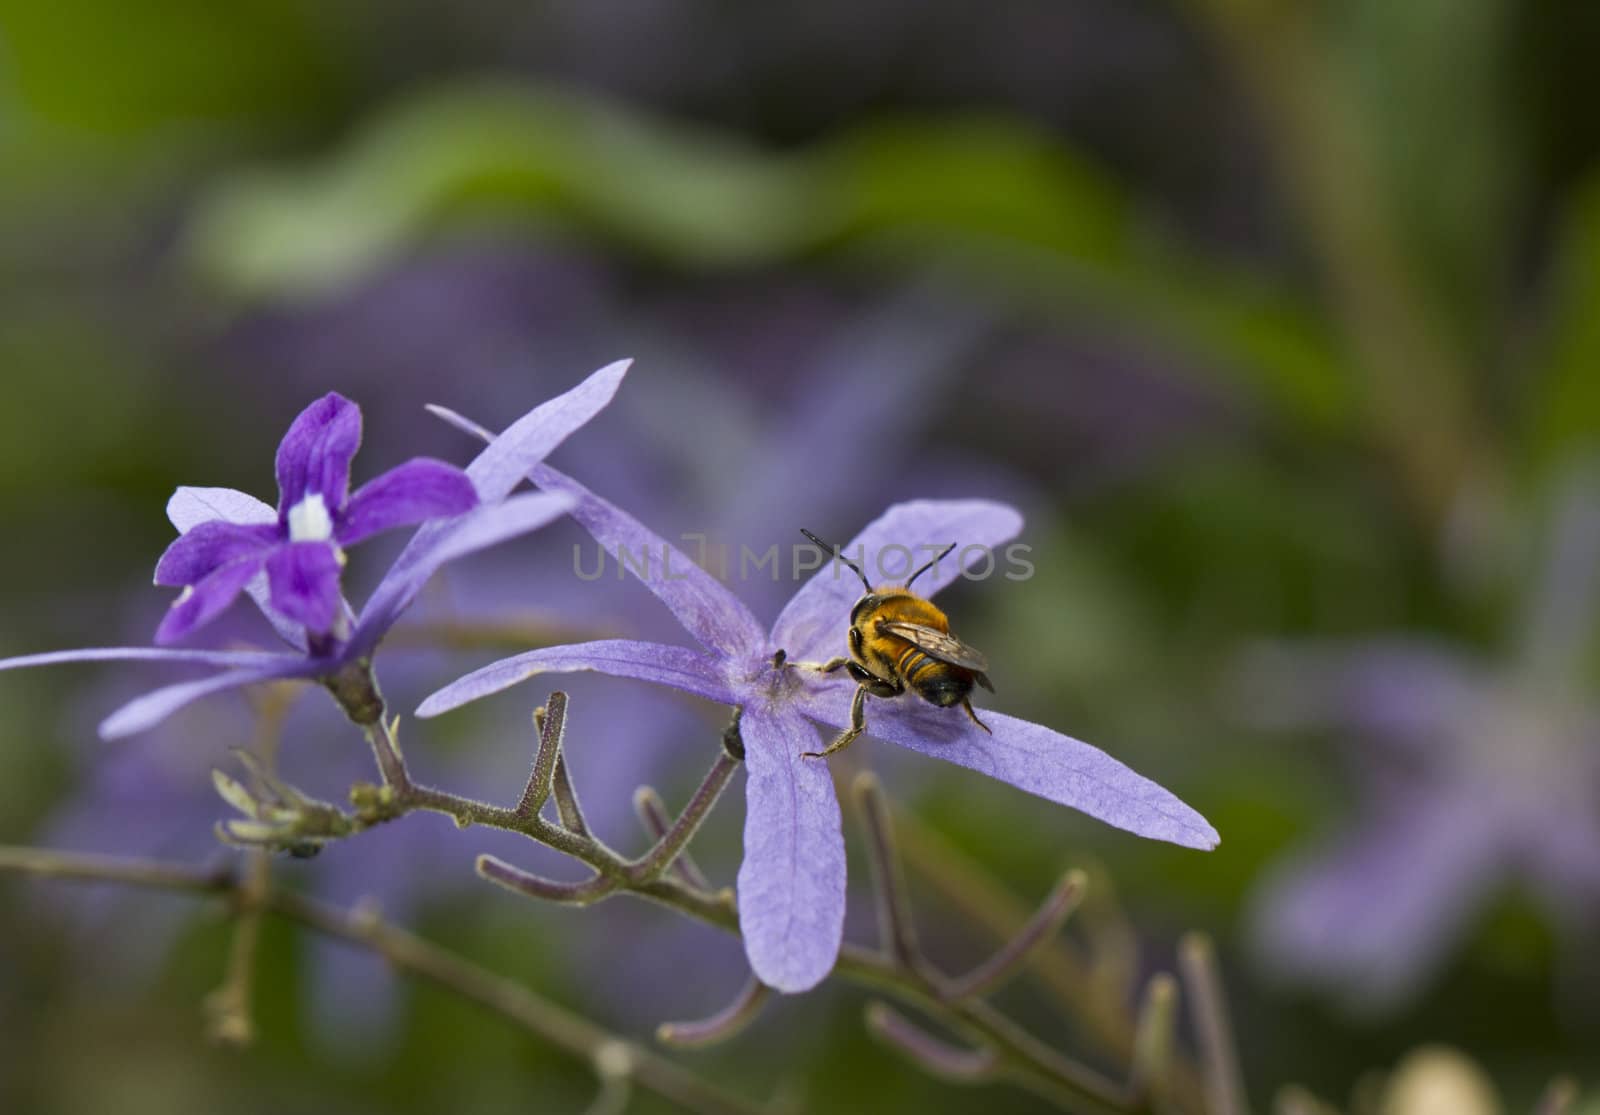 A worker bee on a purple flower viewd from behind the insect